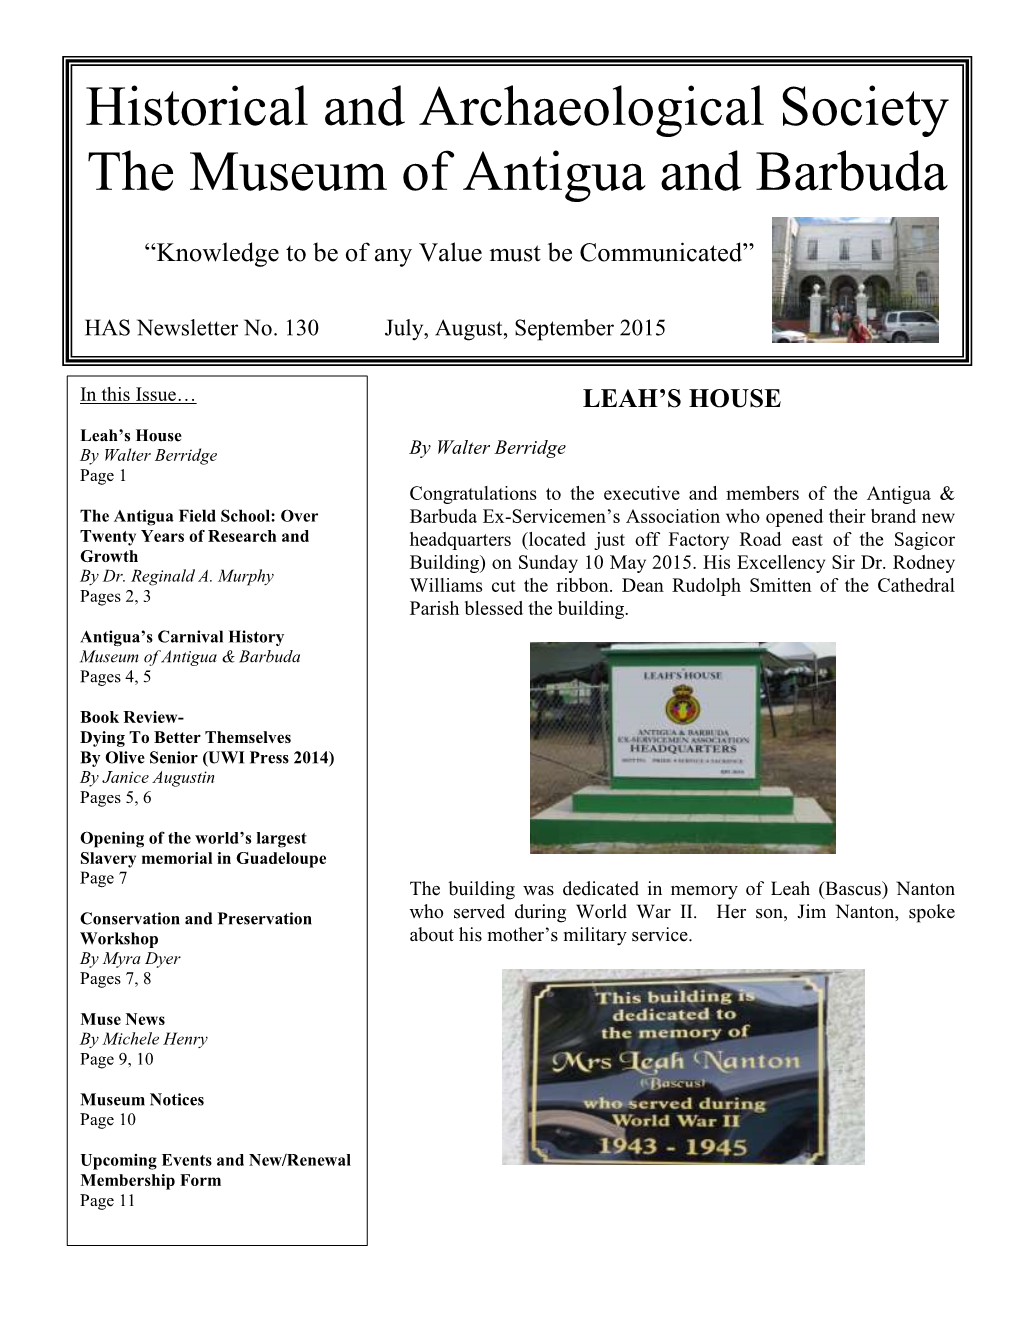 Historical and Archaeological Society the Museum of Antigua and Barbuda